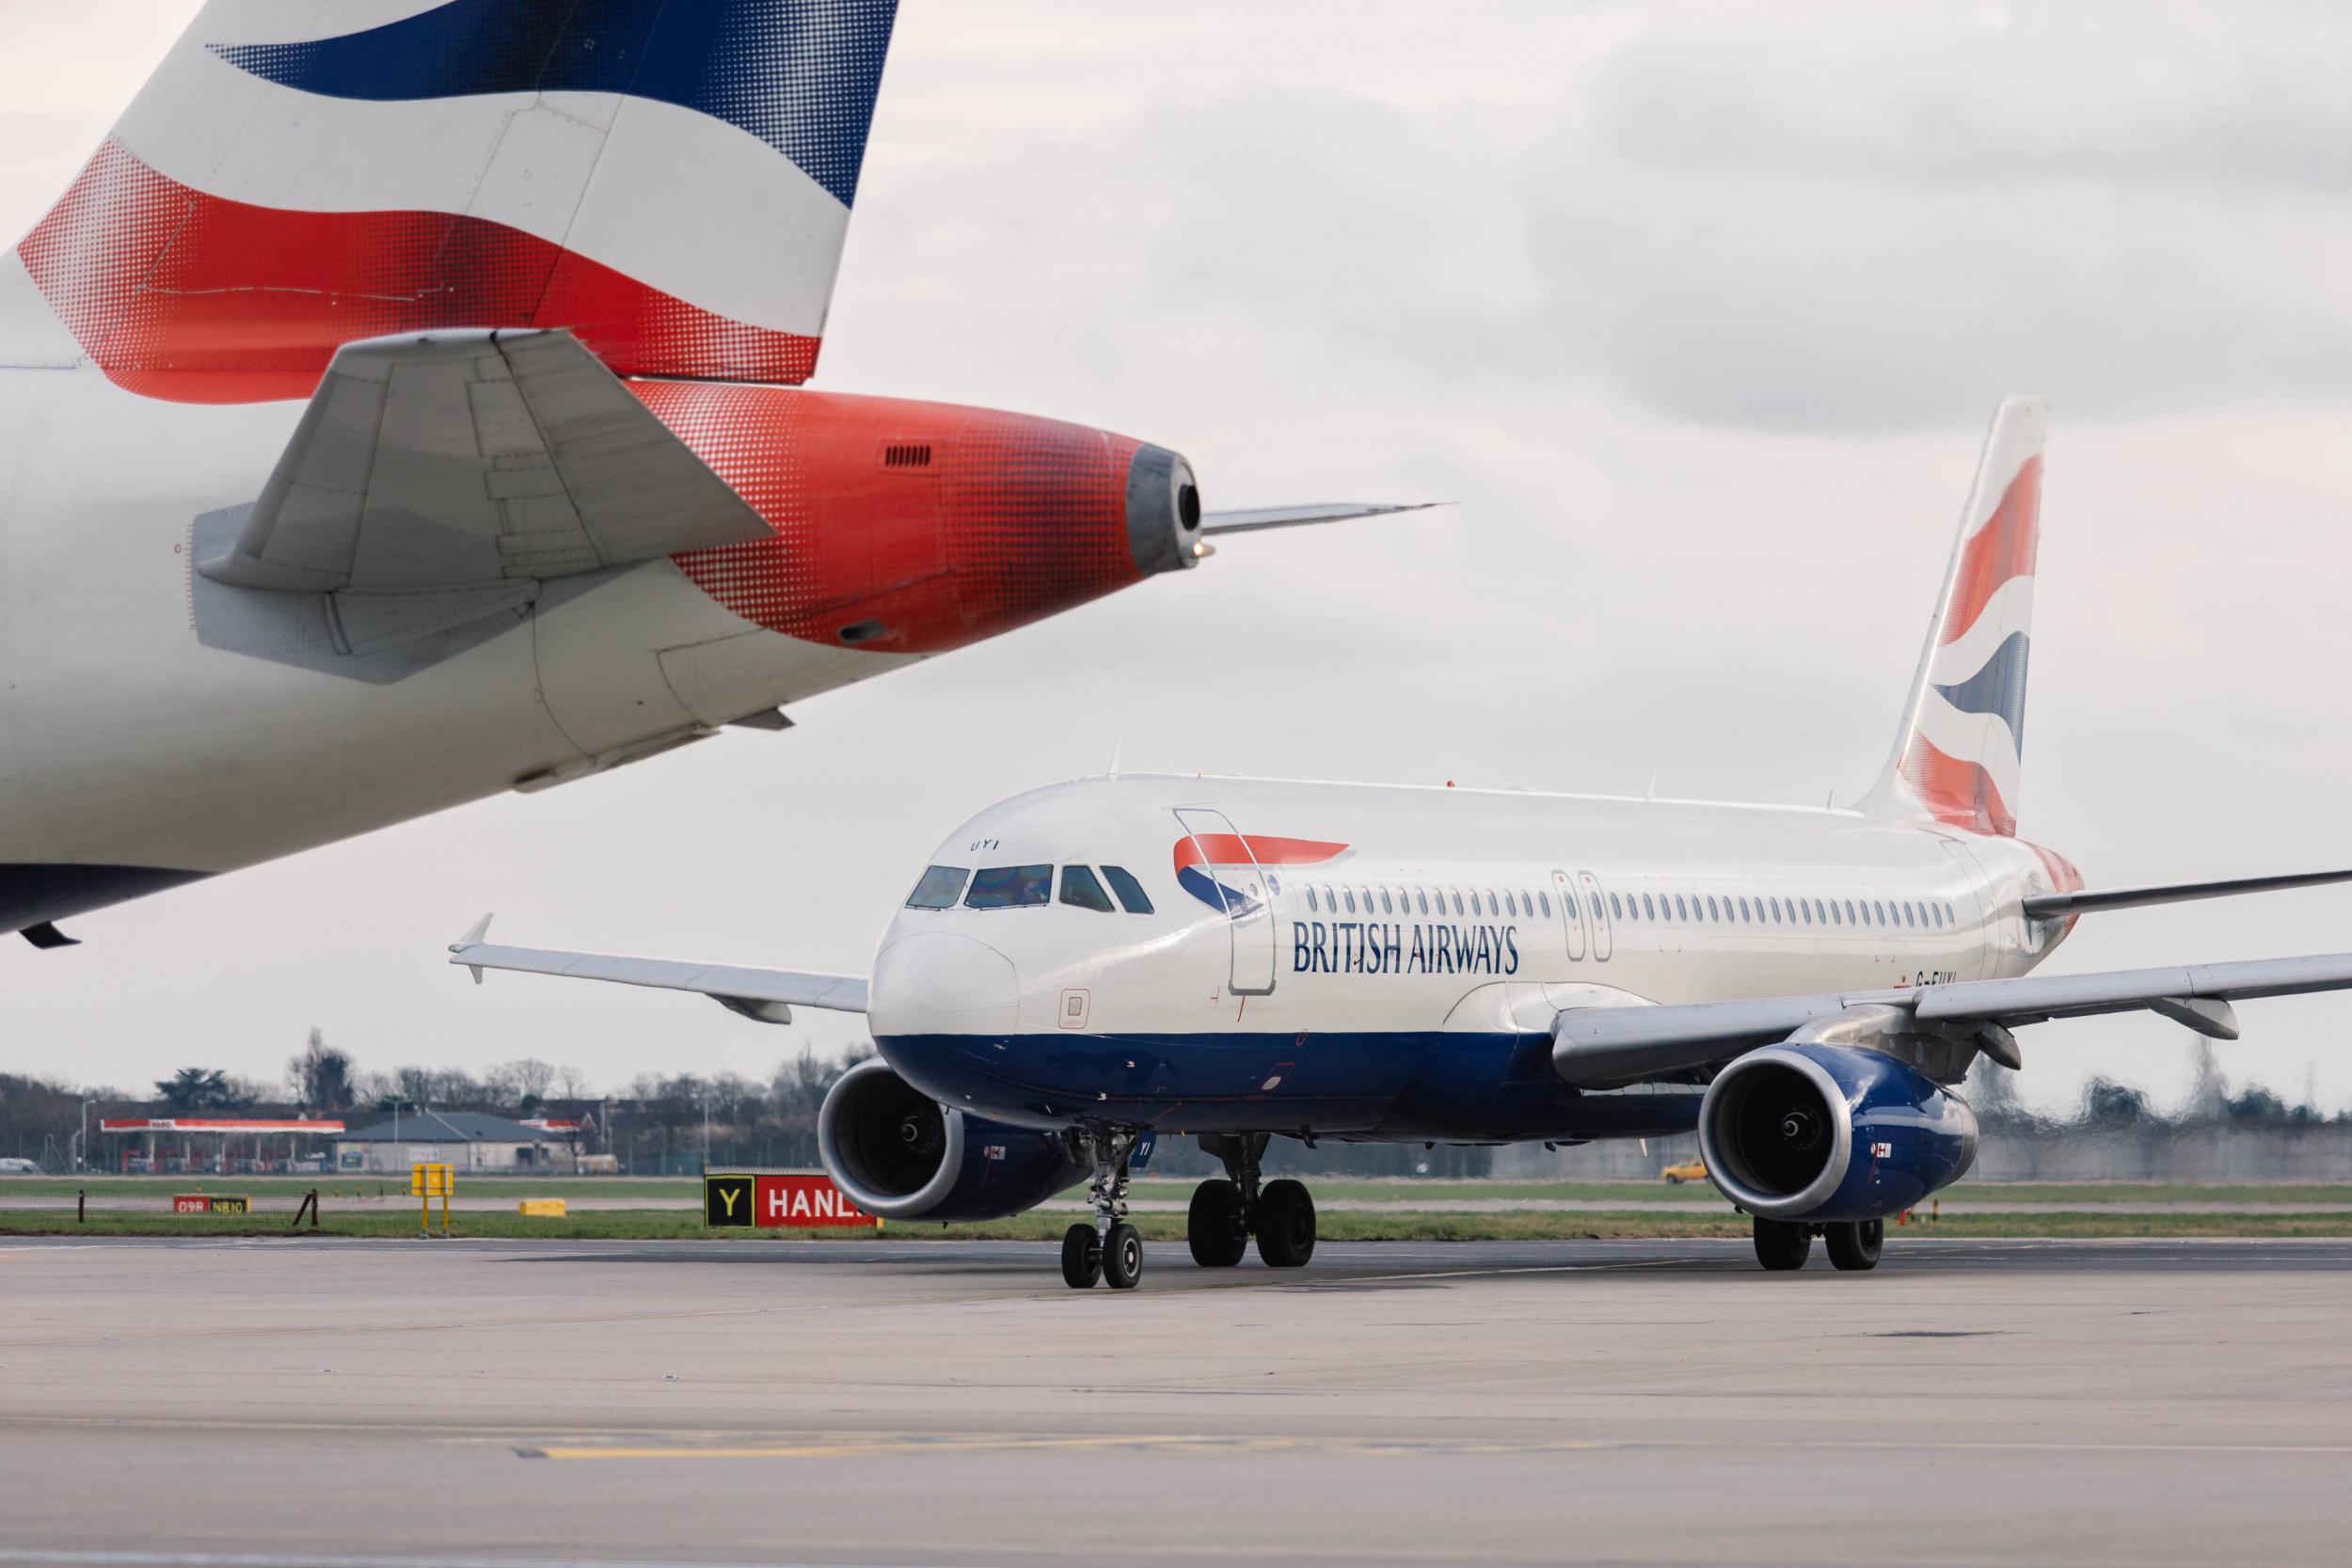 BA boss Alex Cruz suggested the airline might shake things up